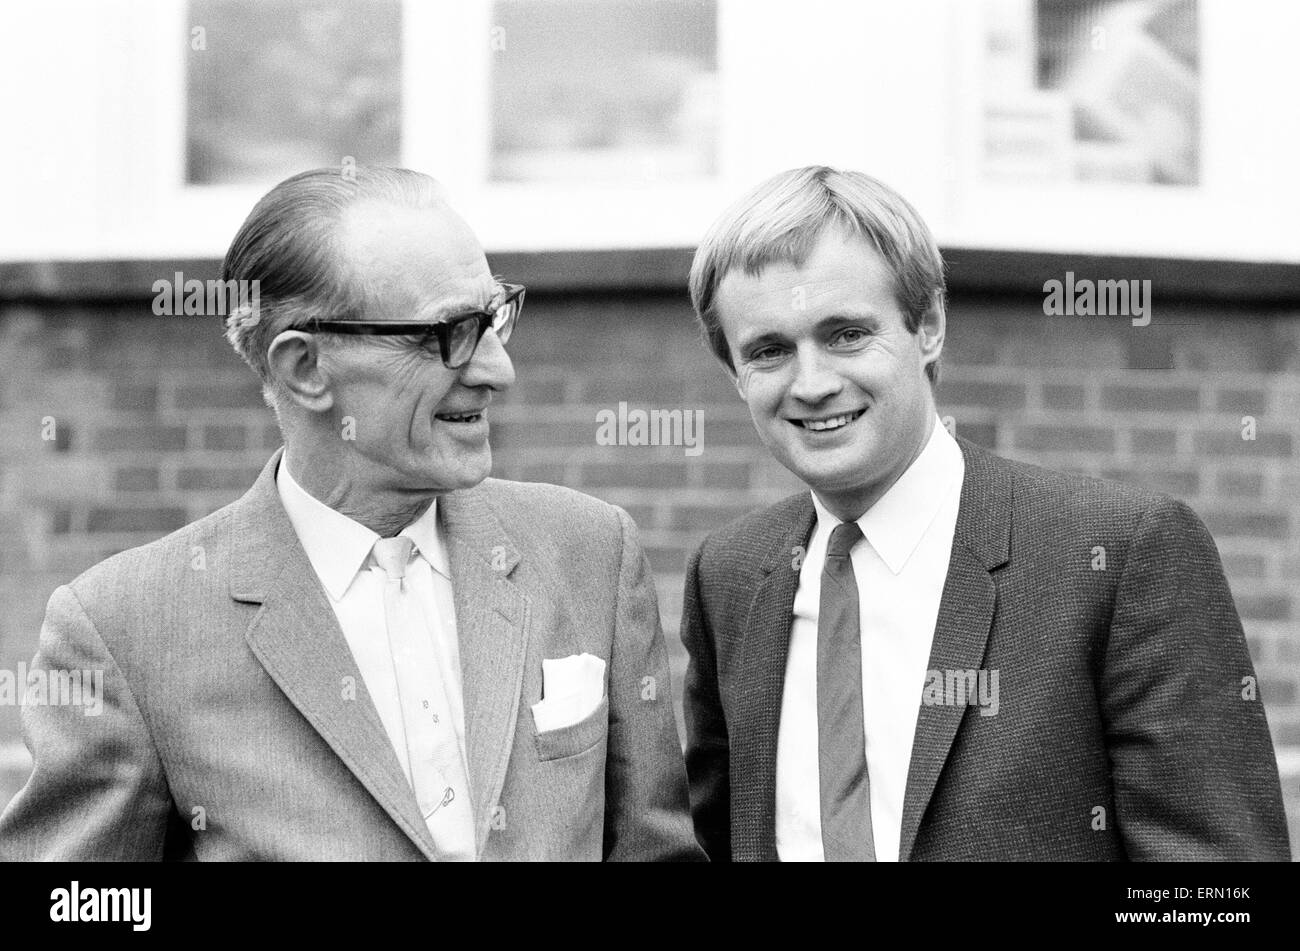 David McCallum, actor who plays the role of secret agent Illya Kuryakin in NBC show The Man from U.N.C.L.E., pictured at home of parents in Hampstead, London, 16th March 1966. UK Promotion Tour. Standing with father David Snr. Stock Photo